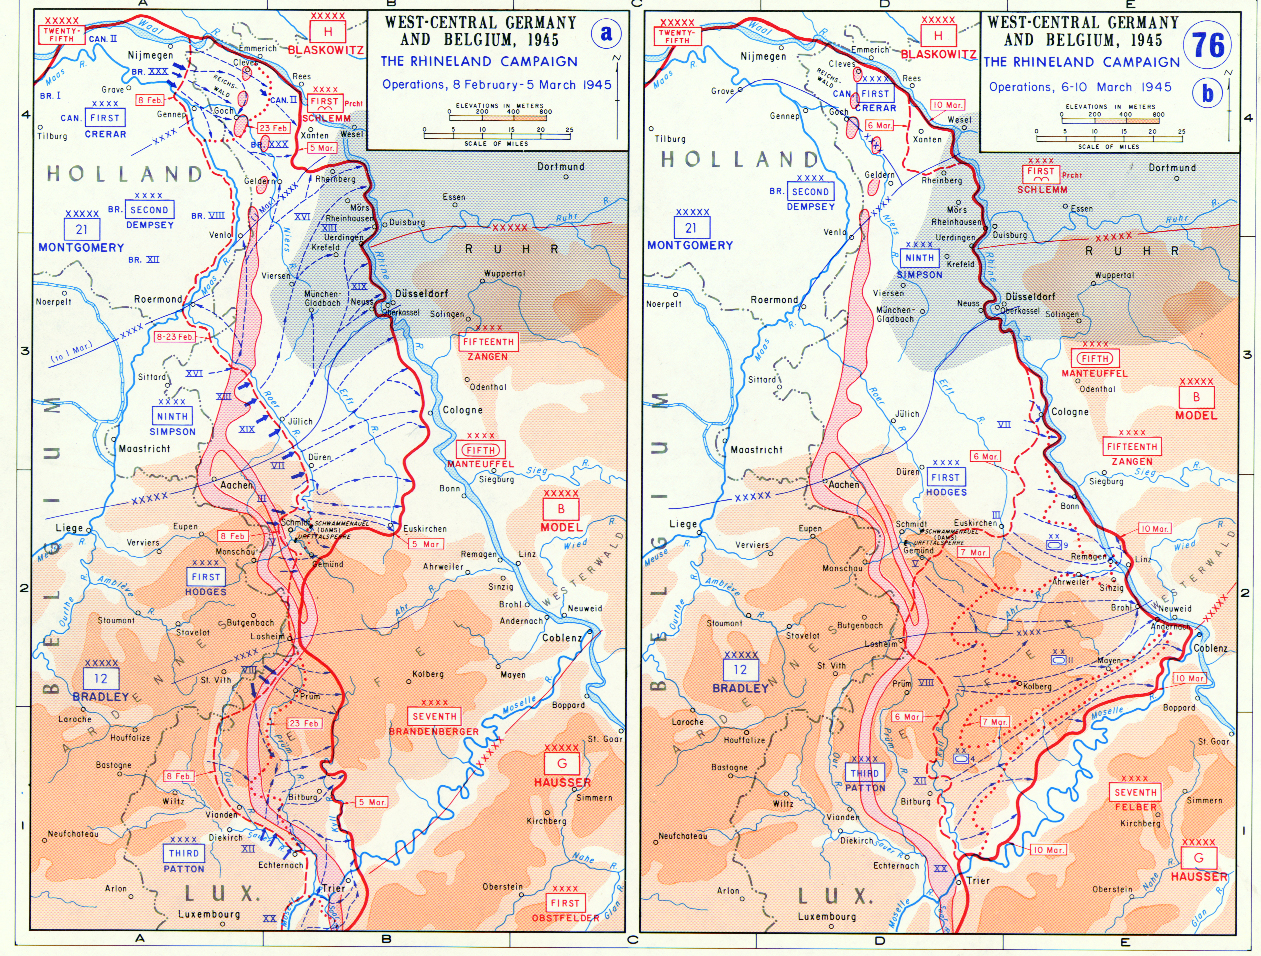 Map Map Depicting The Allied Advance To The Rhine River In West Central Germany And Belgium 8 Feb 10 Mar 1945 World War Ii Database